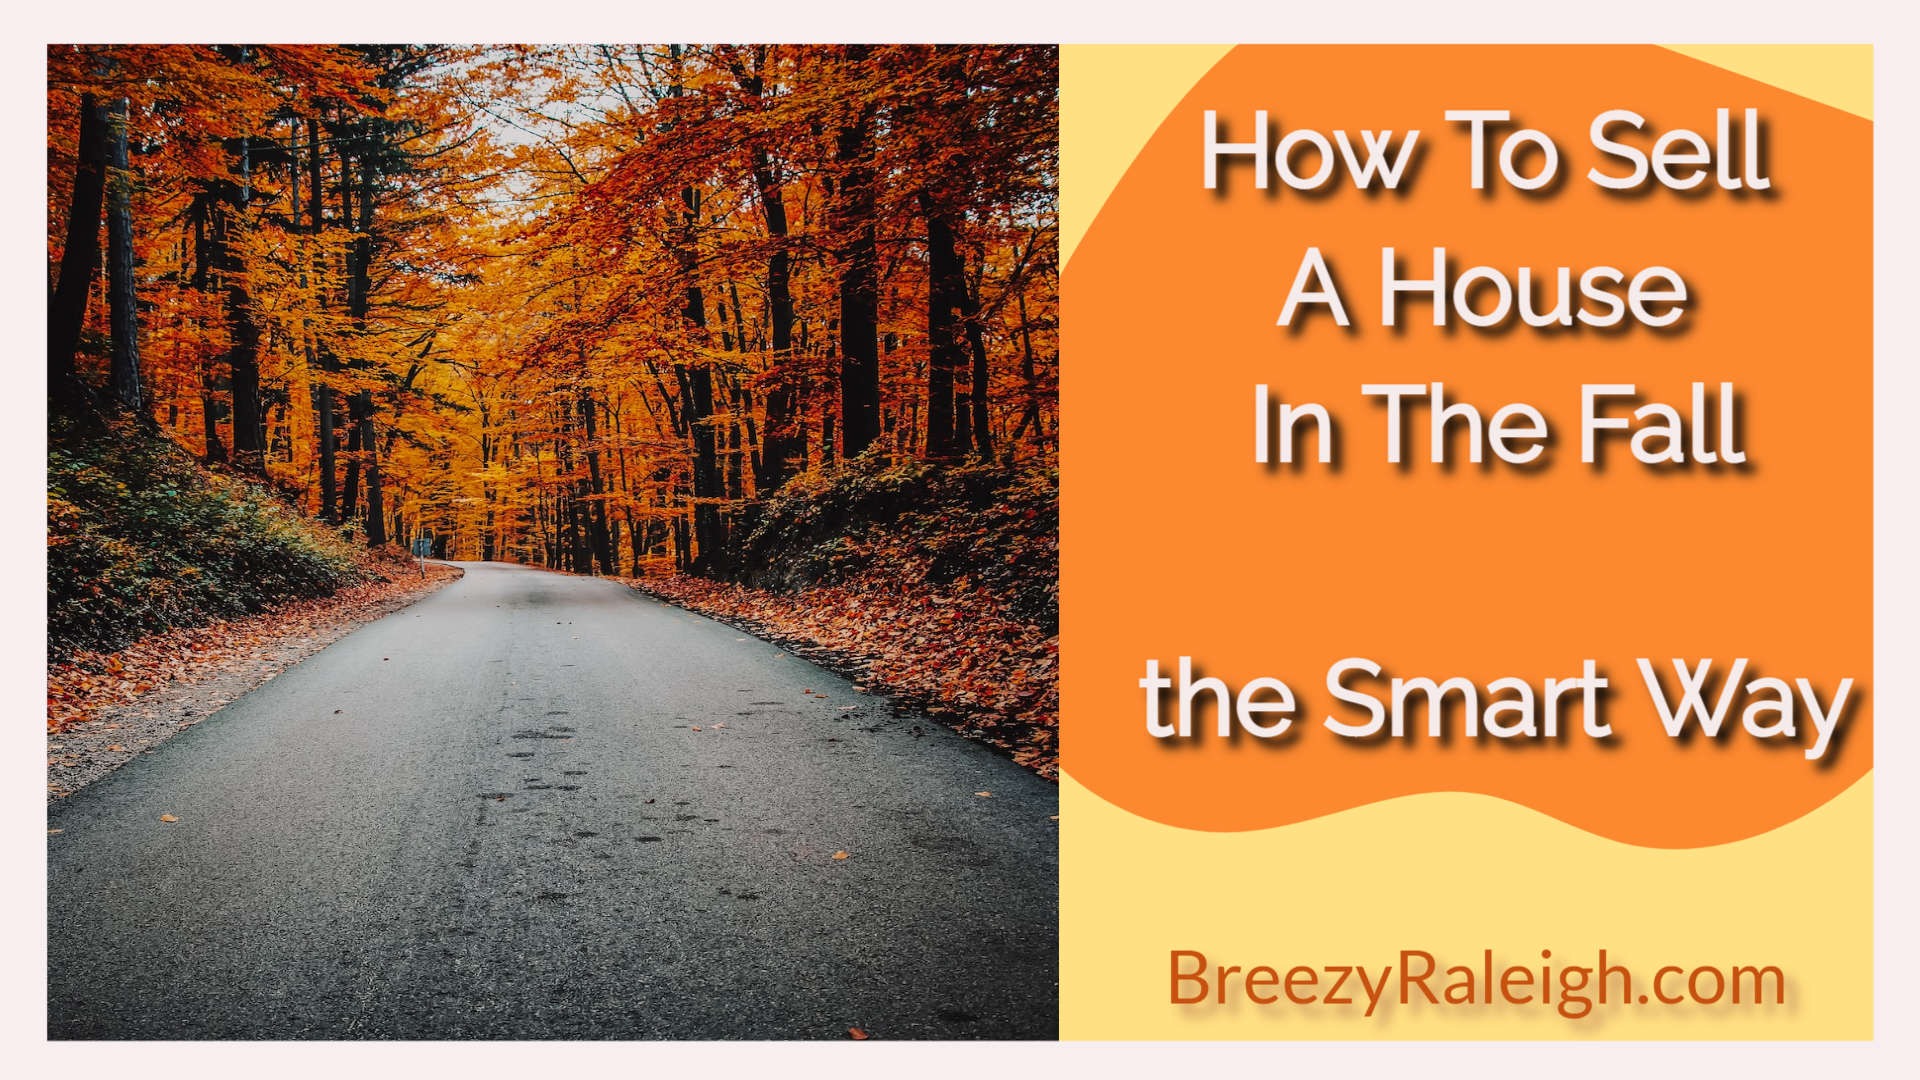 How to sell a house in the Fall